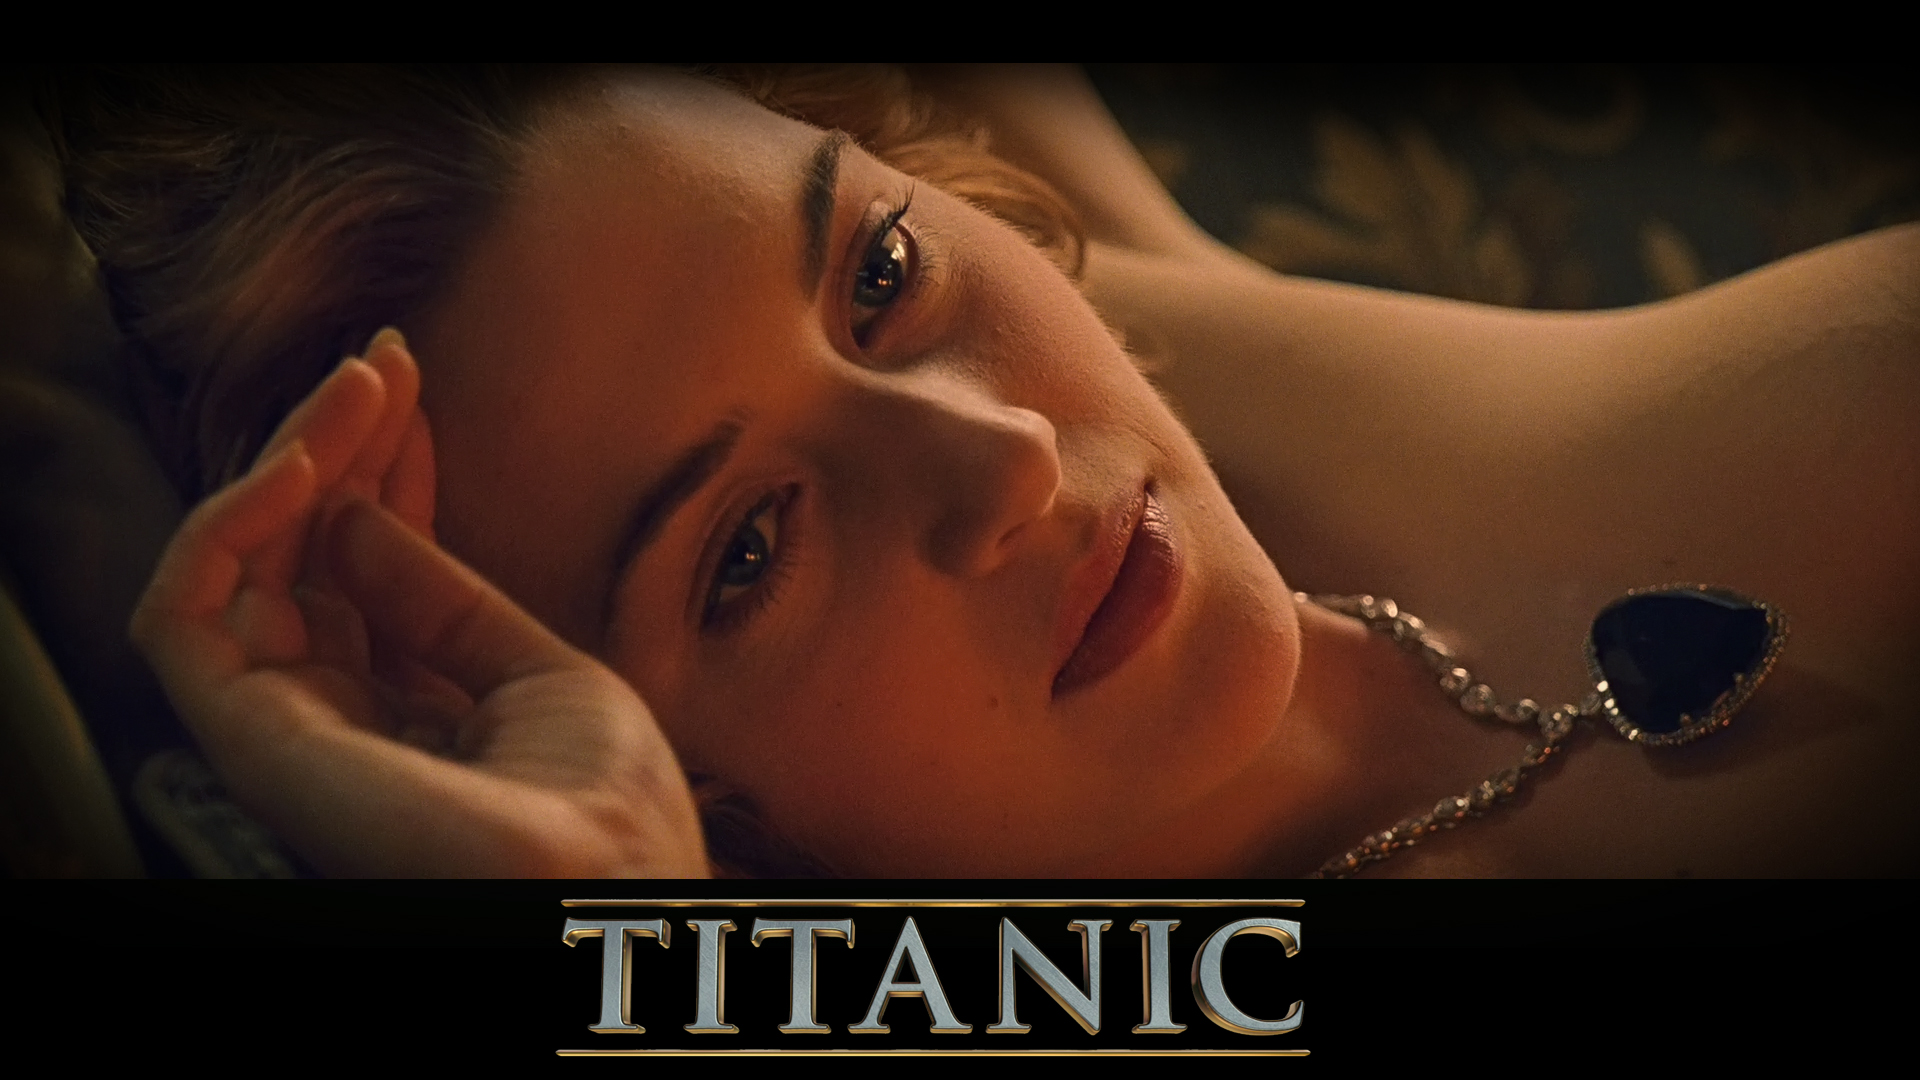 Playing Cards Titanic Pictures Movie Classics For Collection | eBay